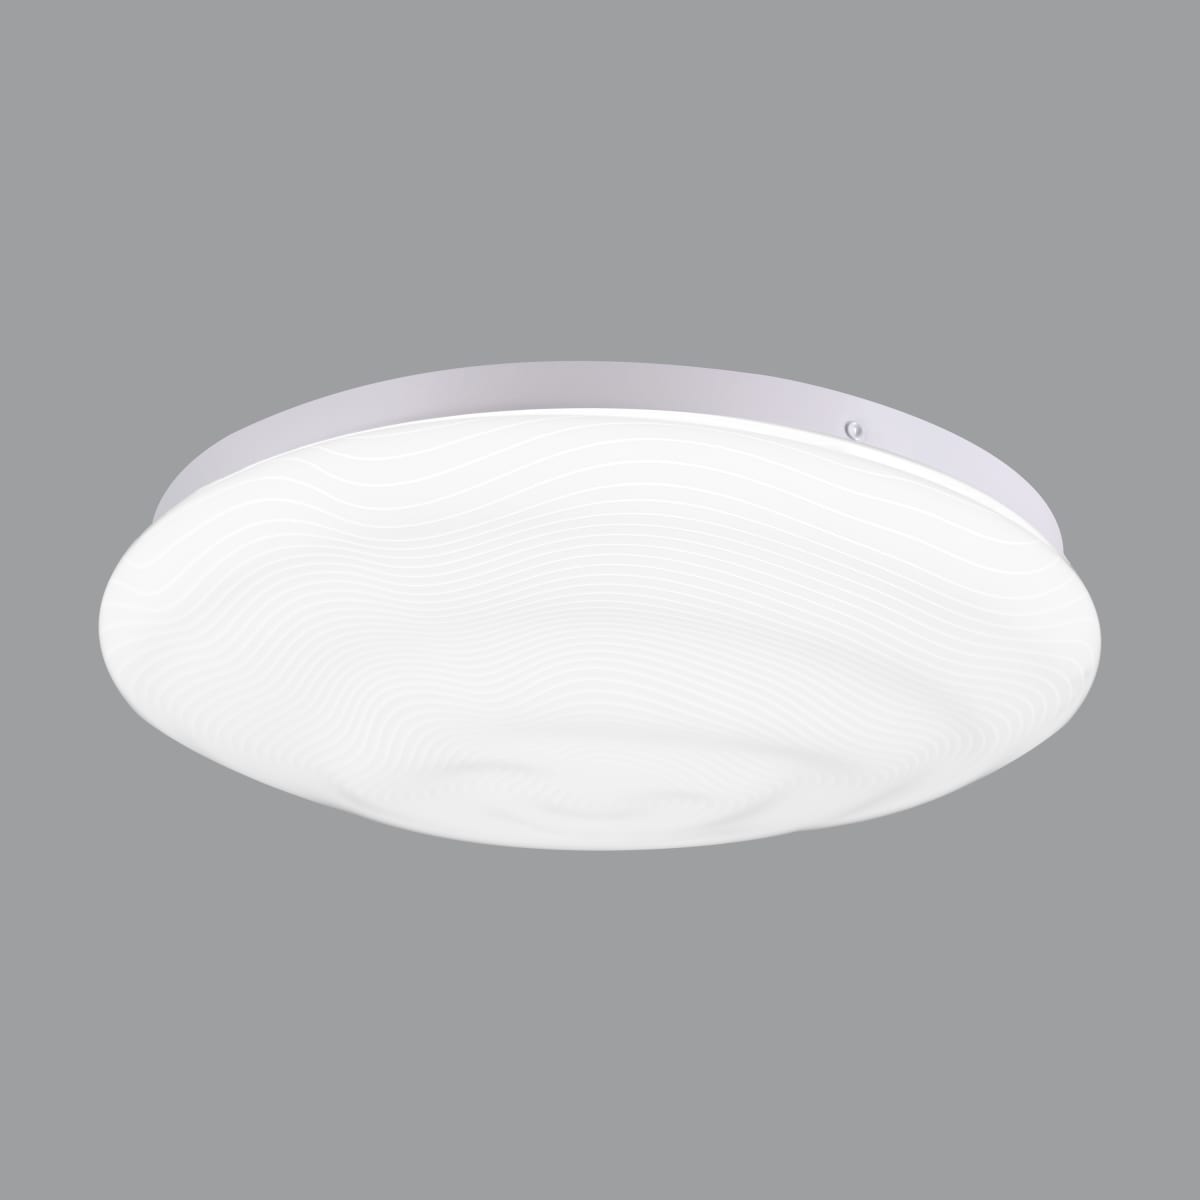 CEILING LIGHT FLOW METAL WHITE D30 CM LED 24W CCT DIMMABLE IP44